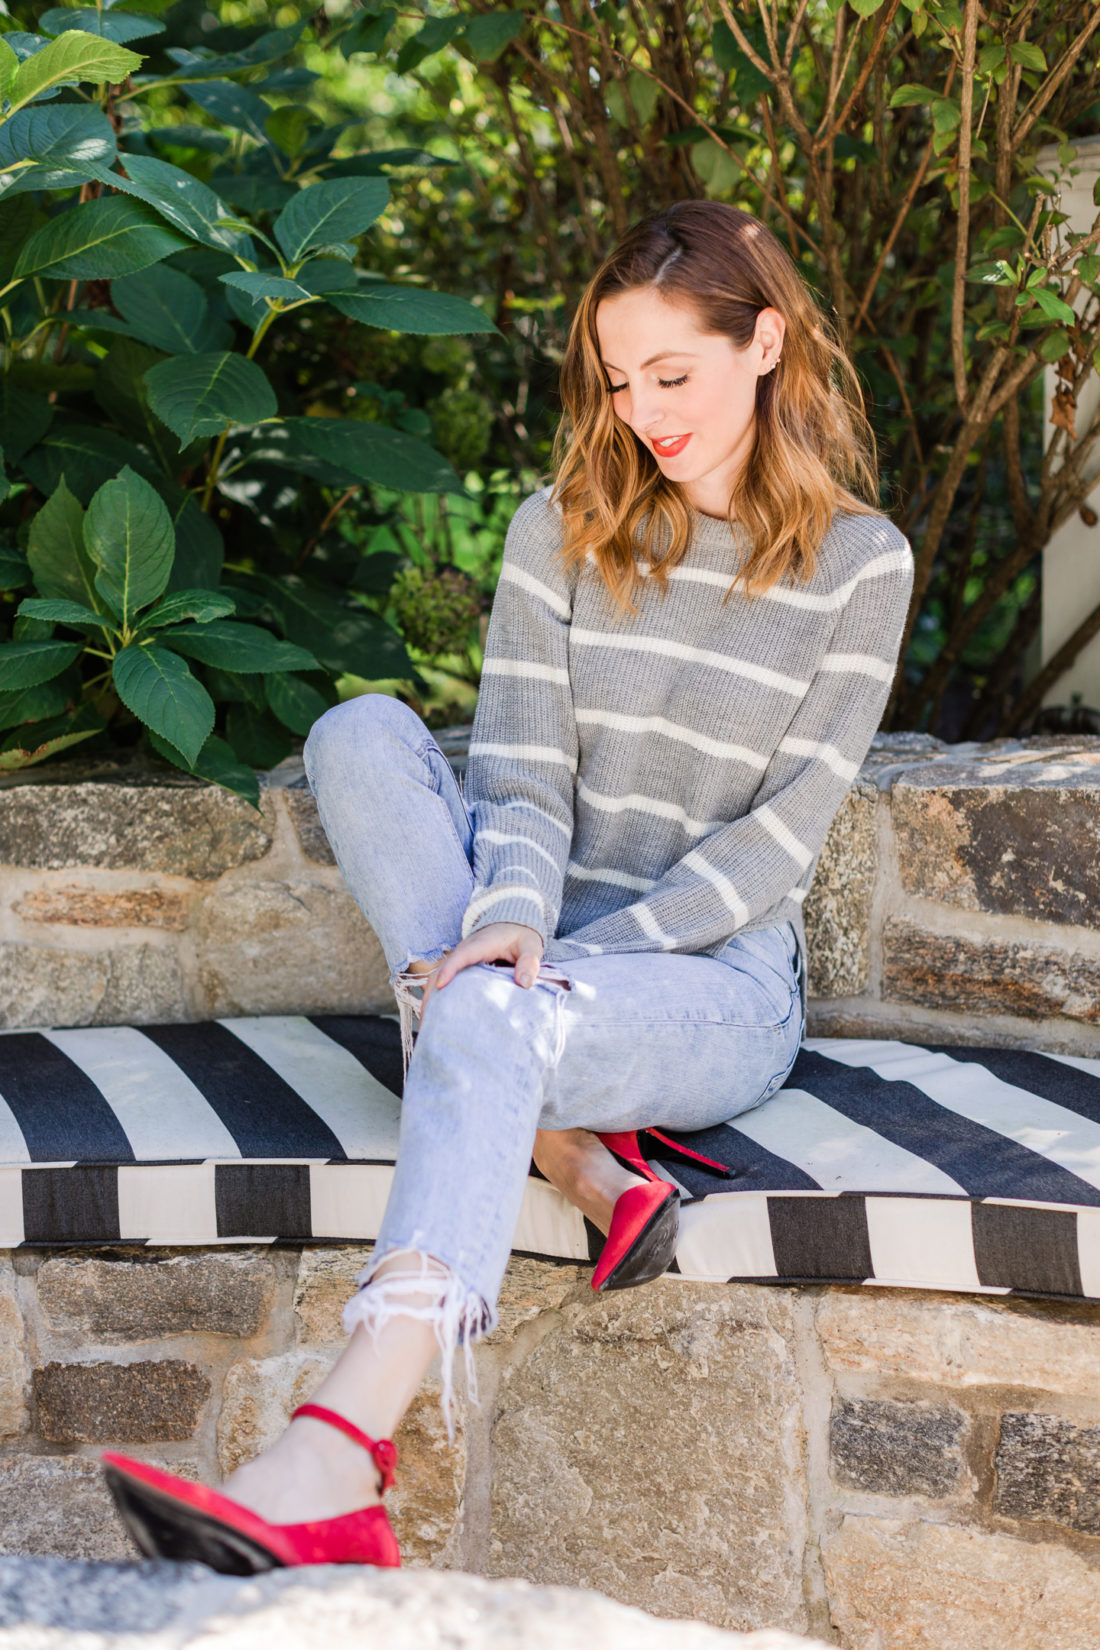 Eva Amurri Martino wears a striped sweater and red heels out by her fire pit in Connecticut